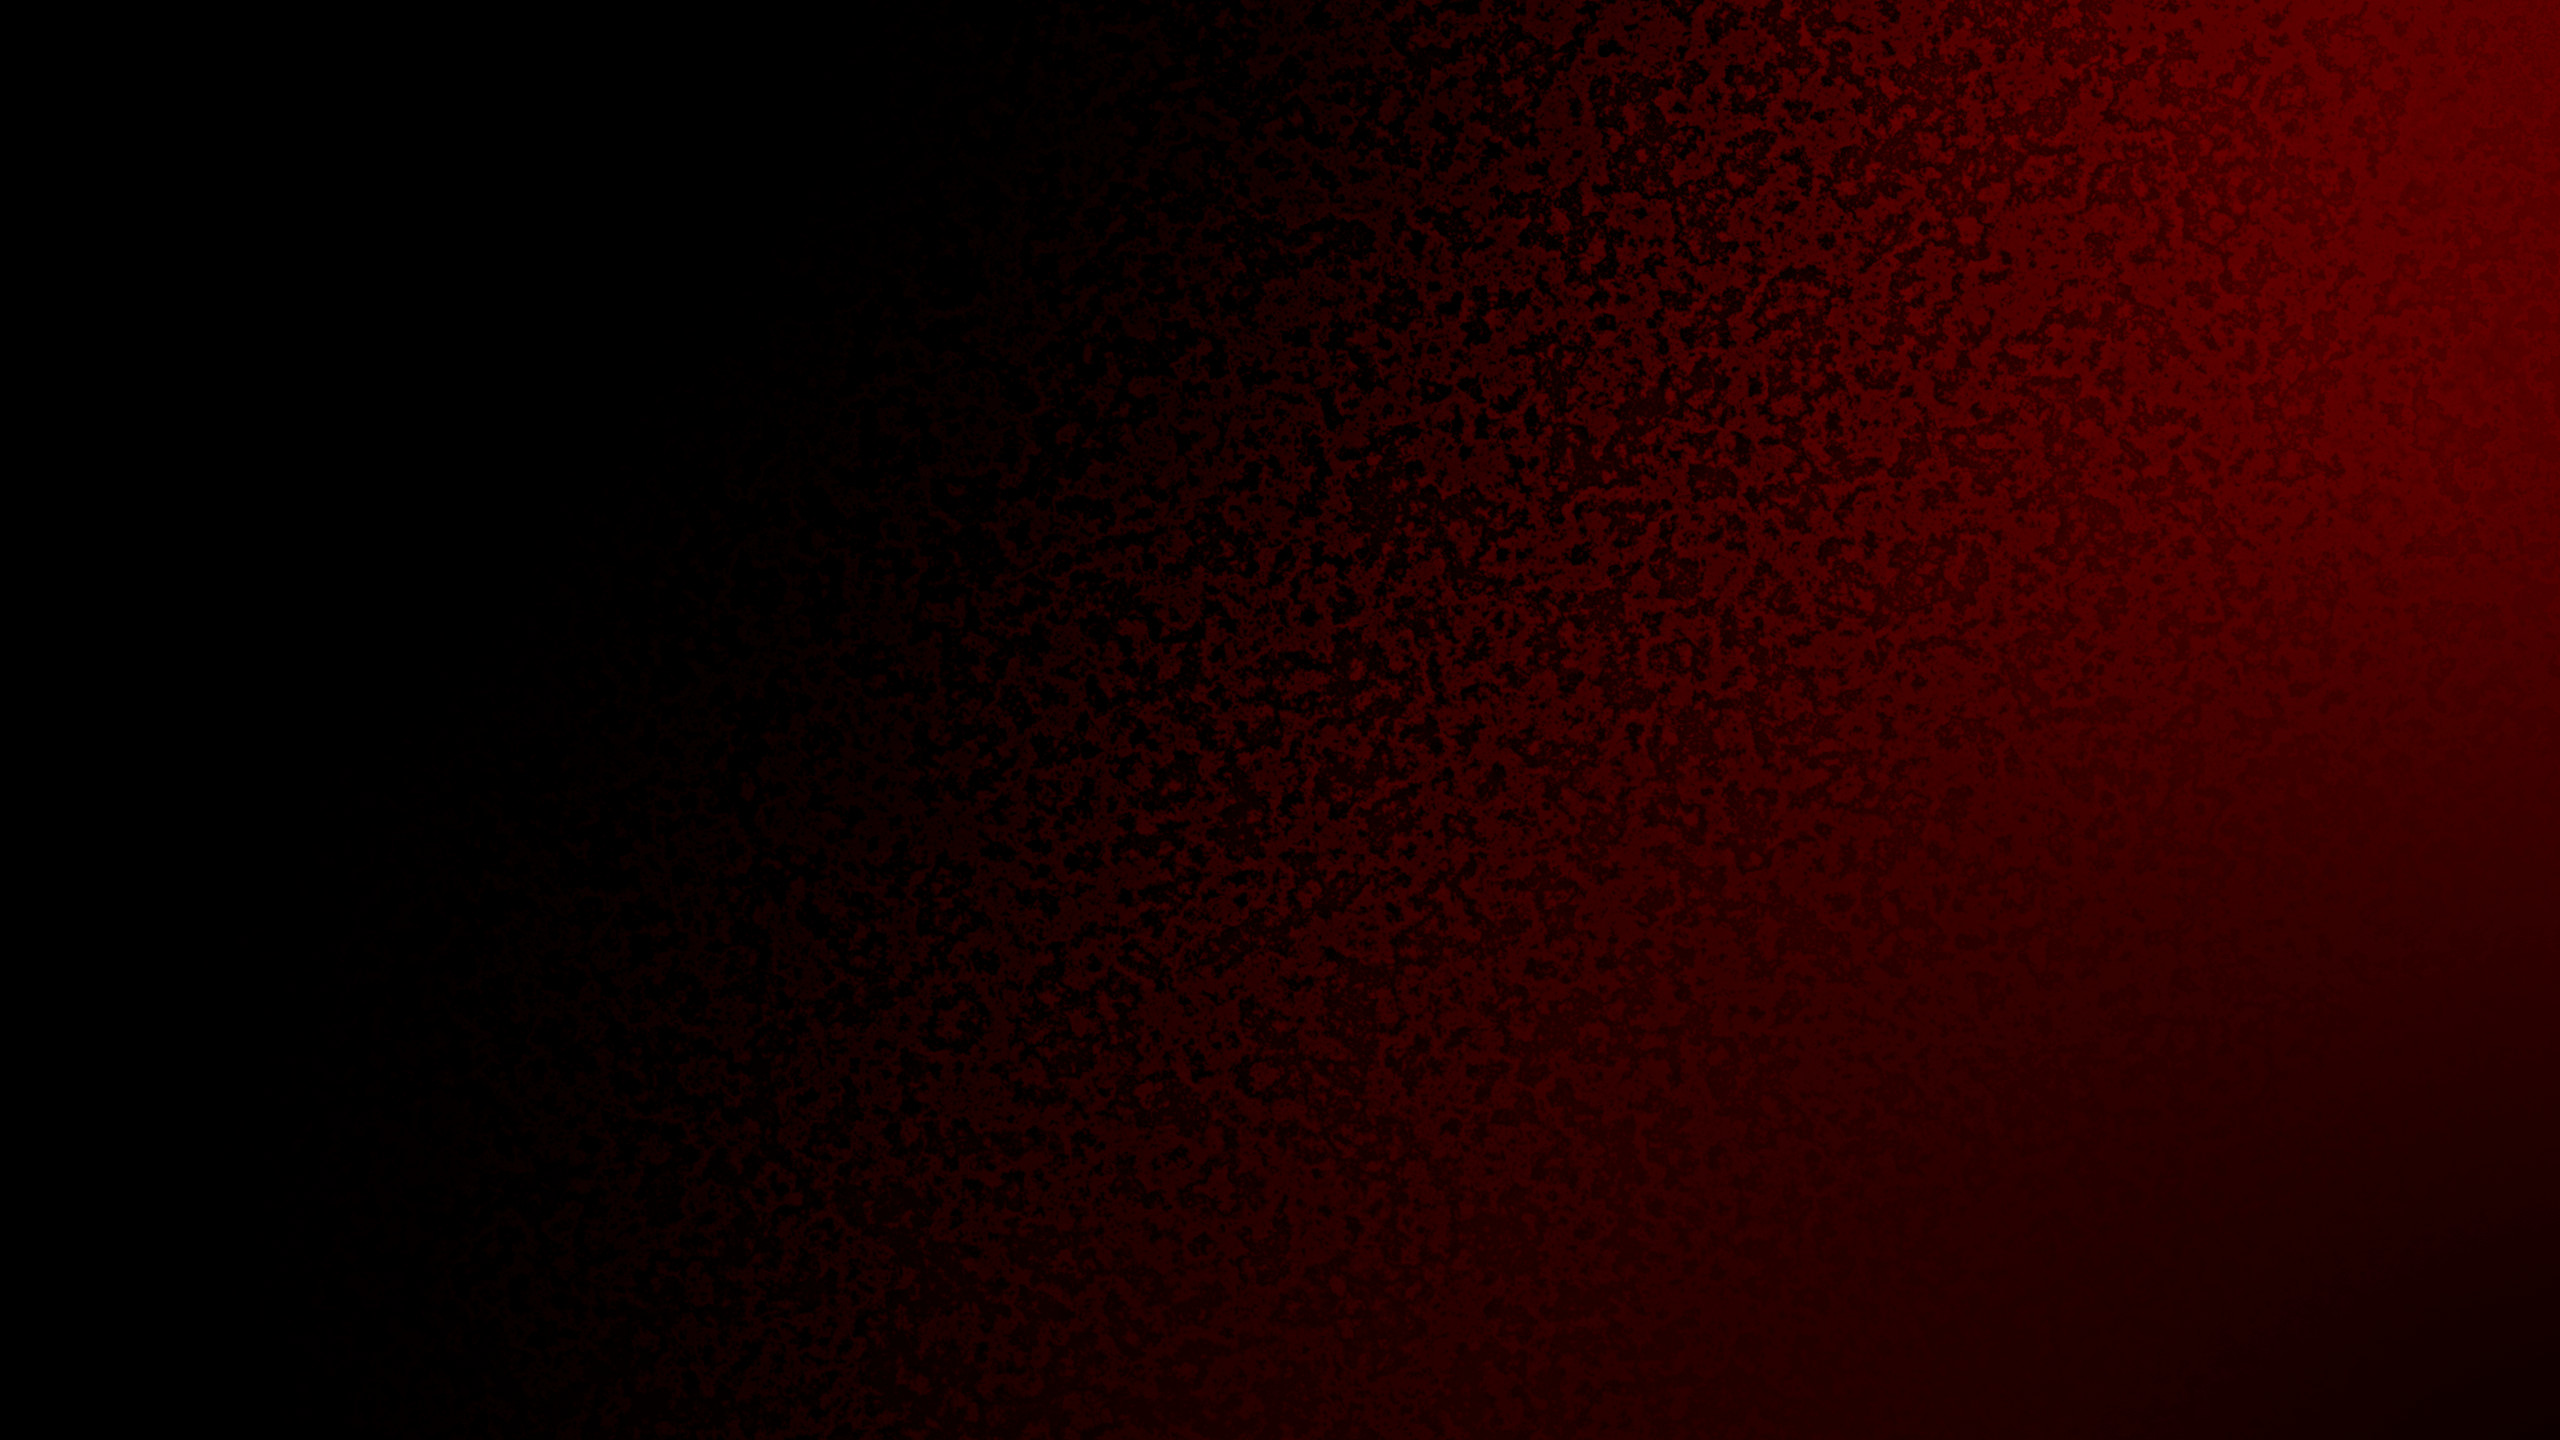 Black And Red Abstract Wallpaper (56+ Images)